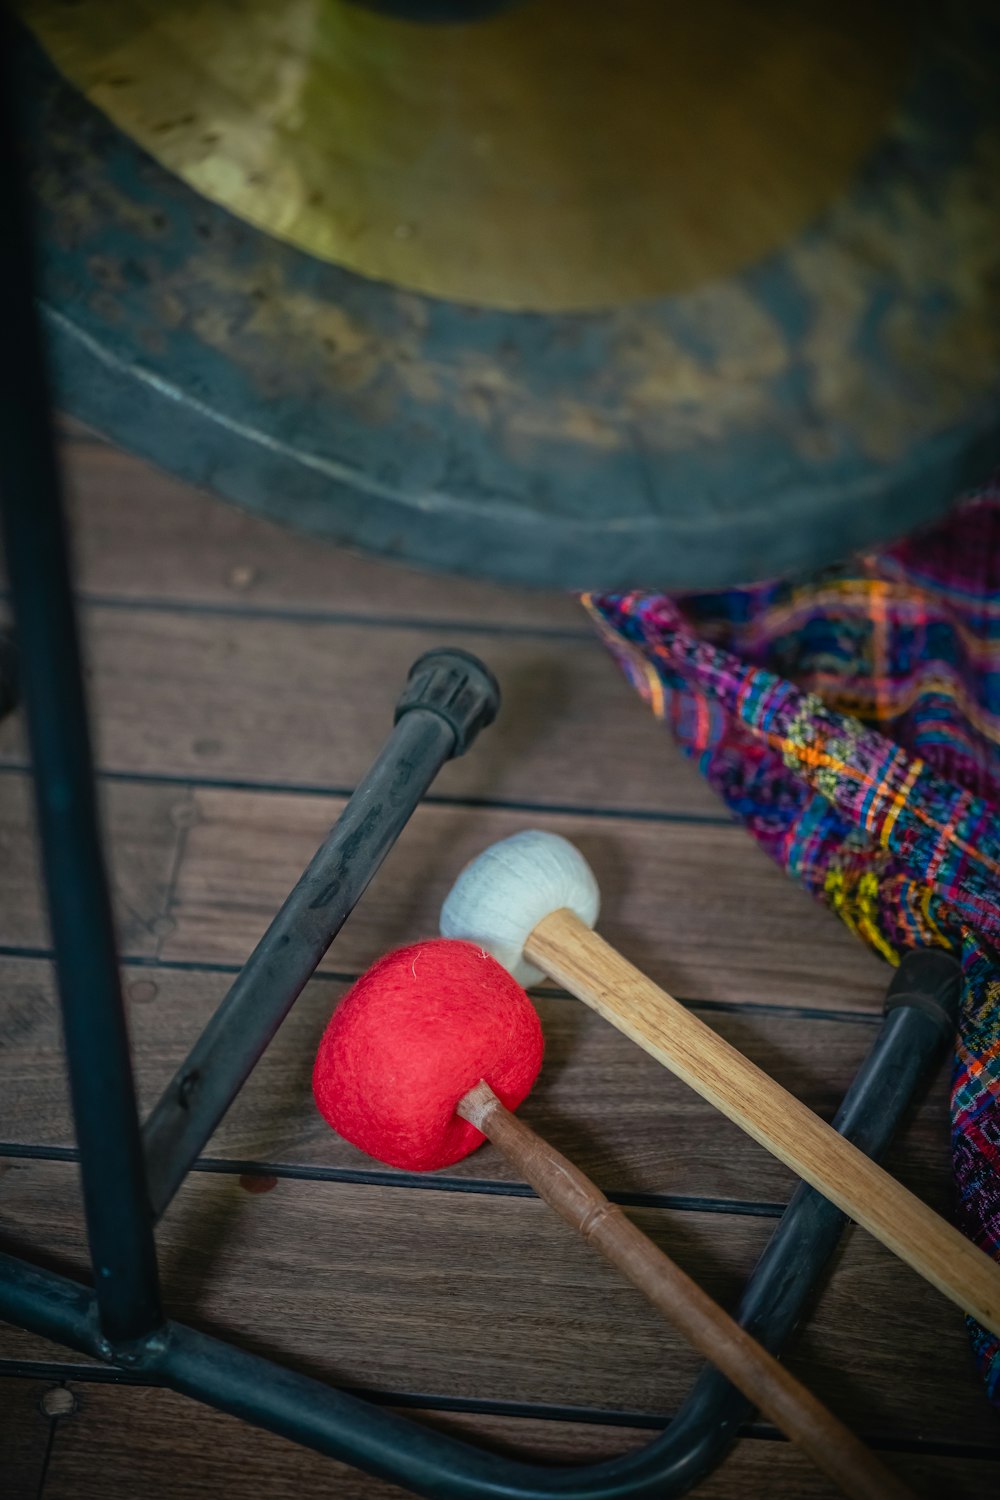 a pair of mallets and a red ball on a wooden floor